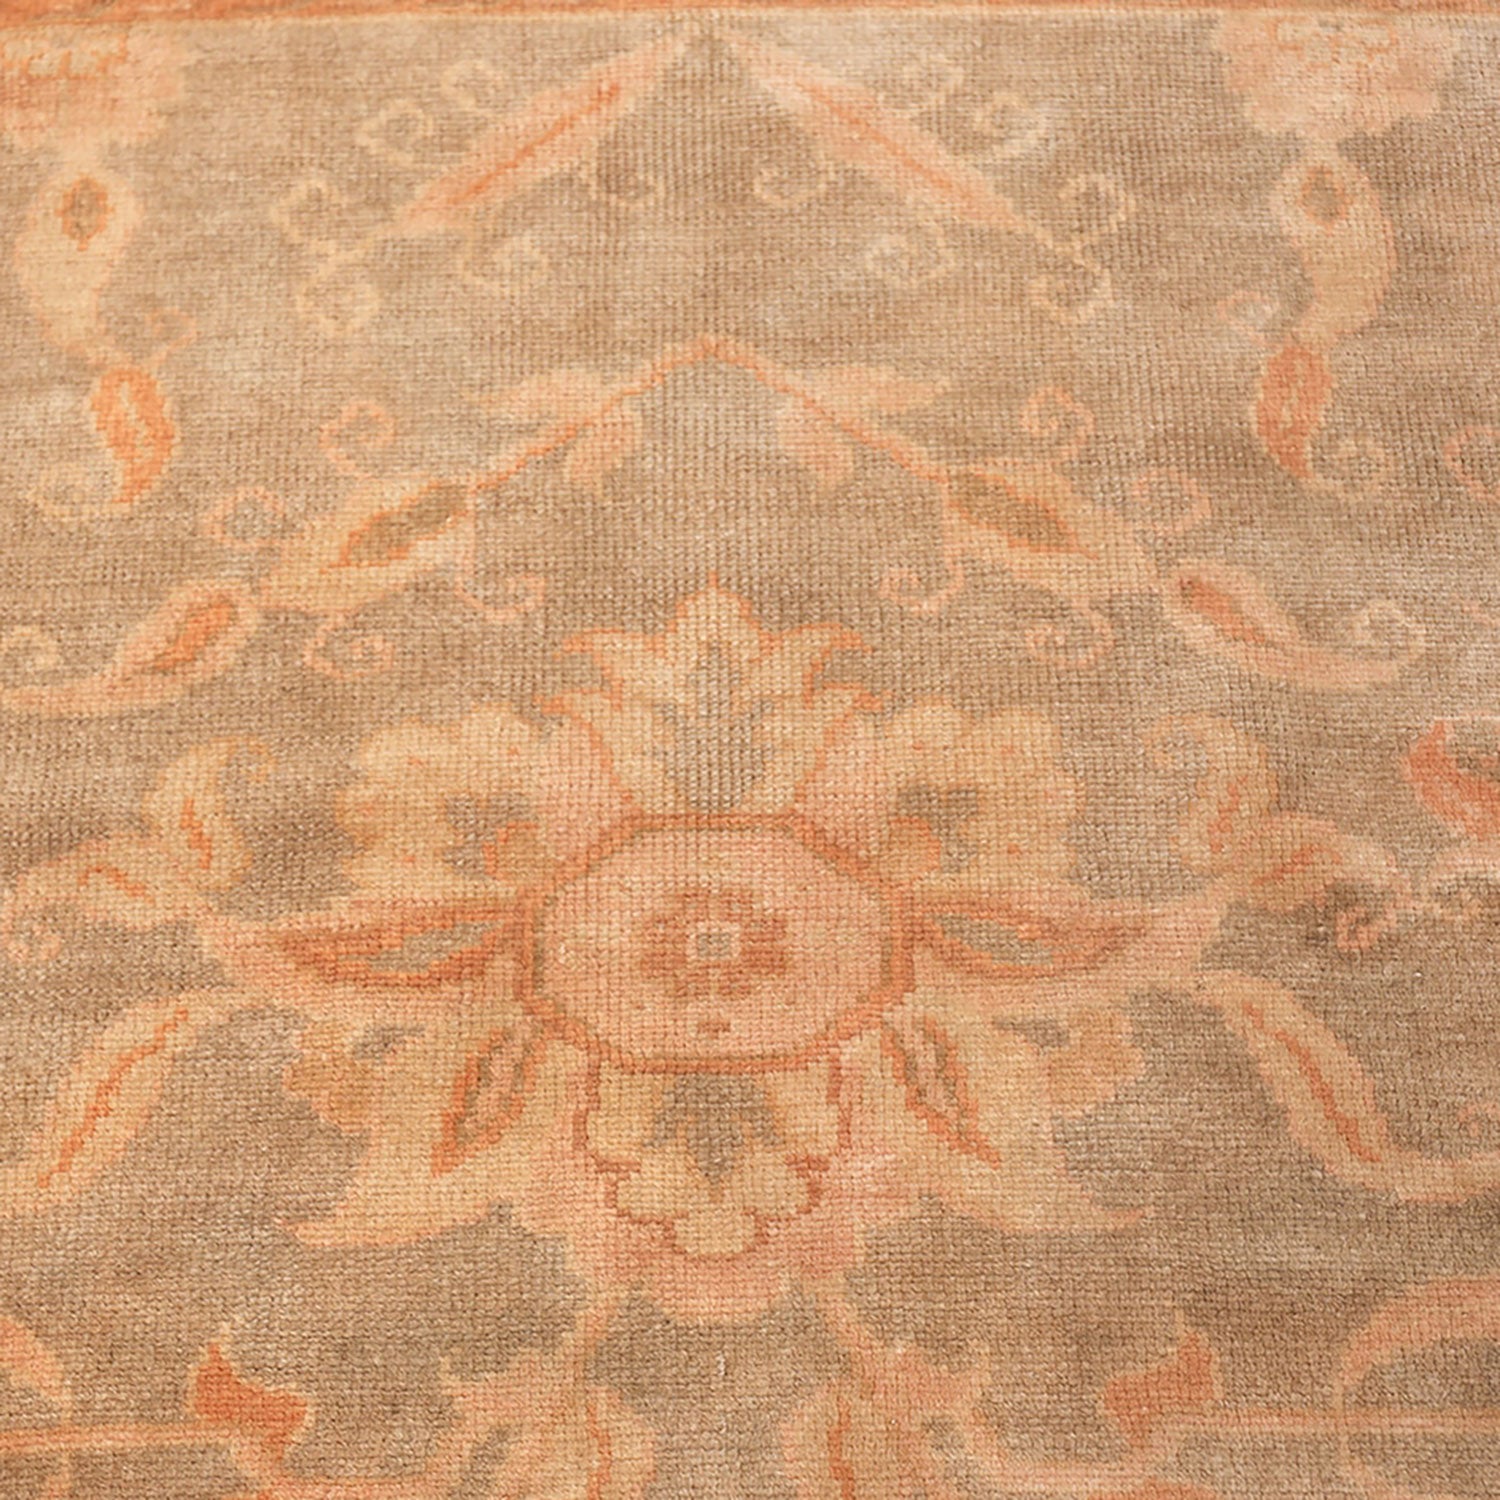 Intricate floral and leaf patterns adorn a woven beige carpet.